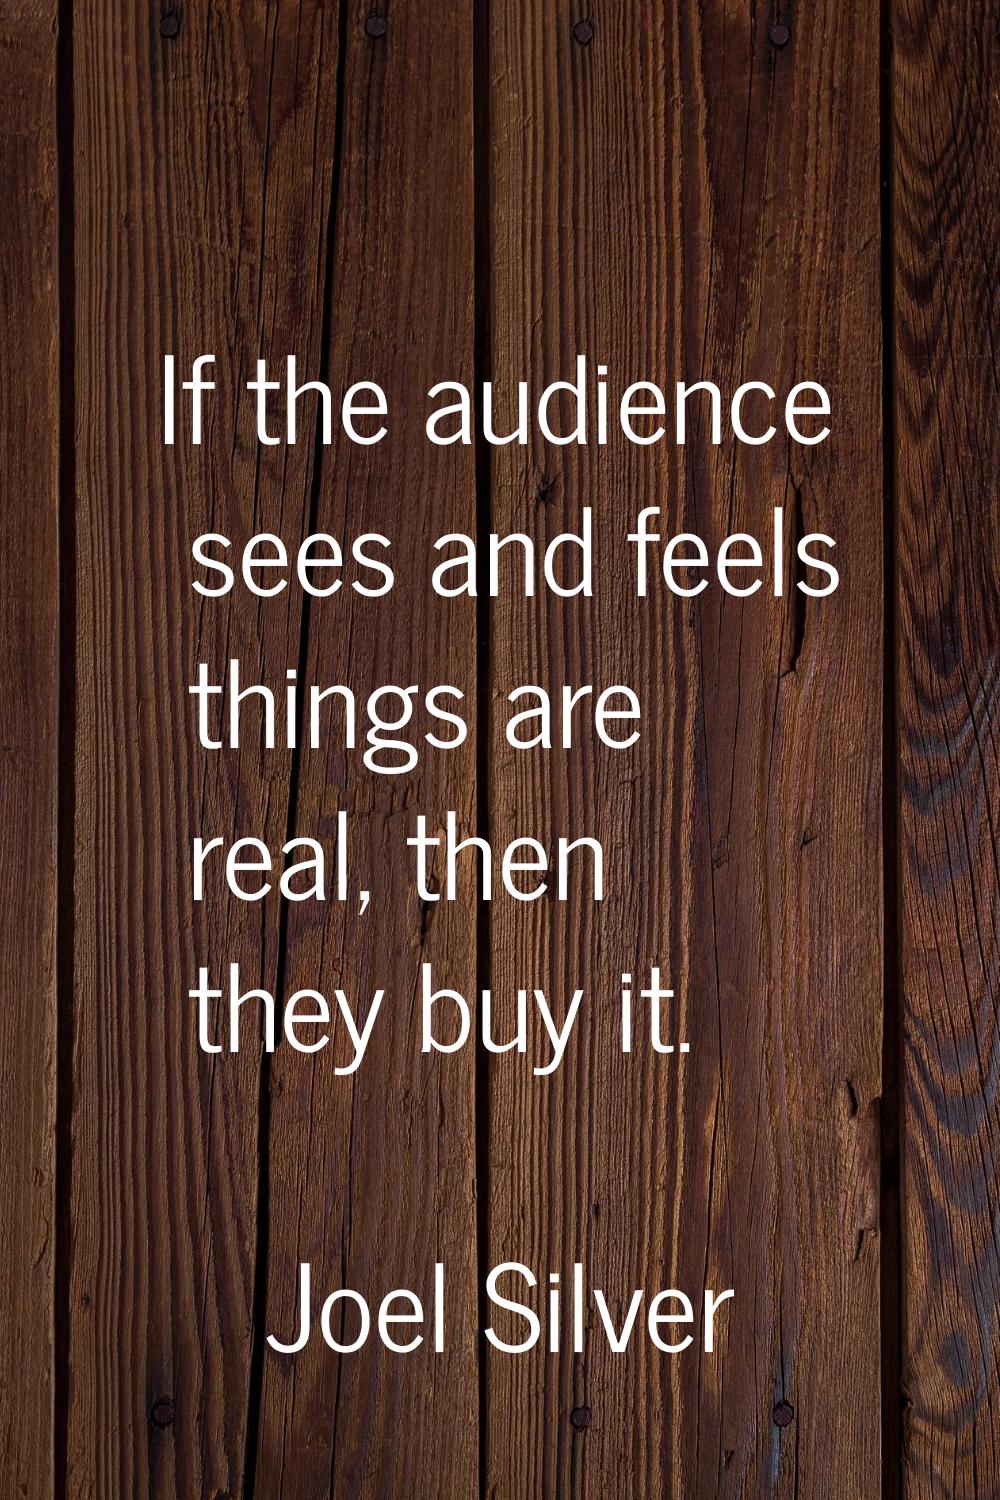 If the audience sees and feels things are real, then they buy it.